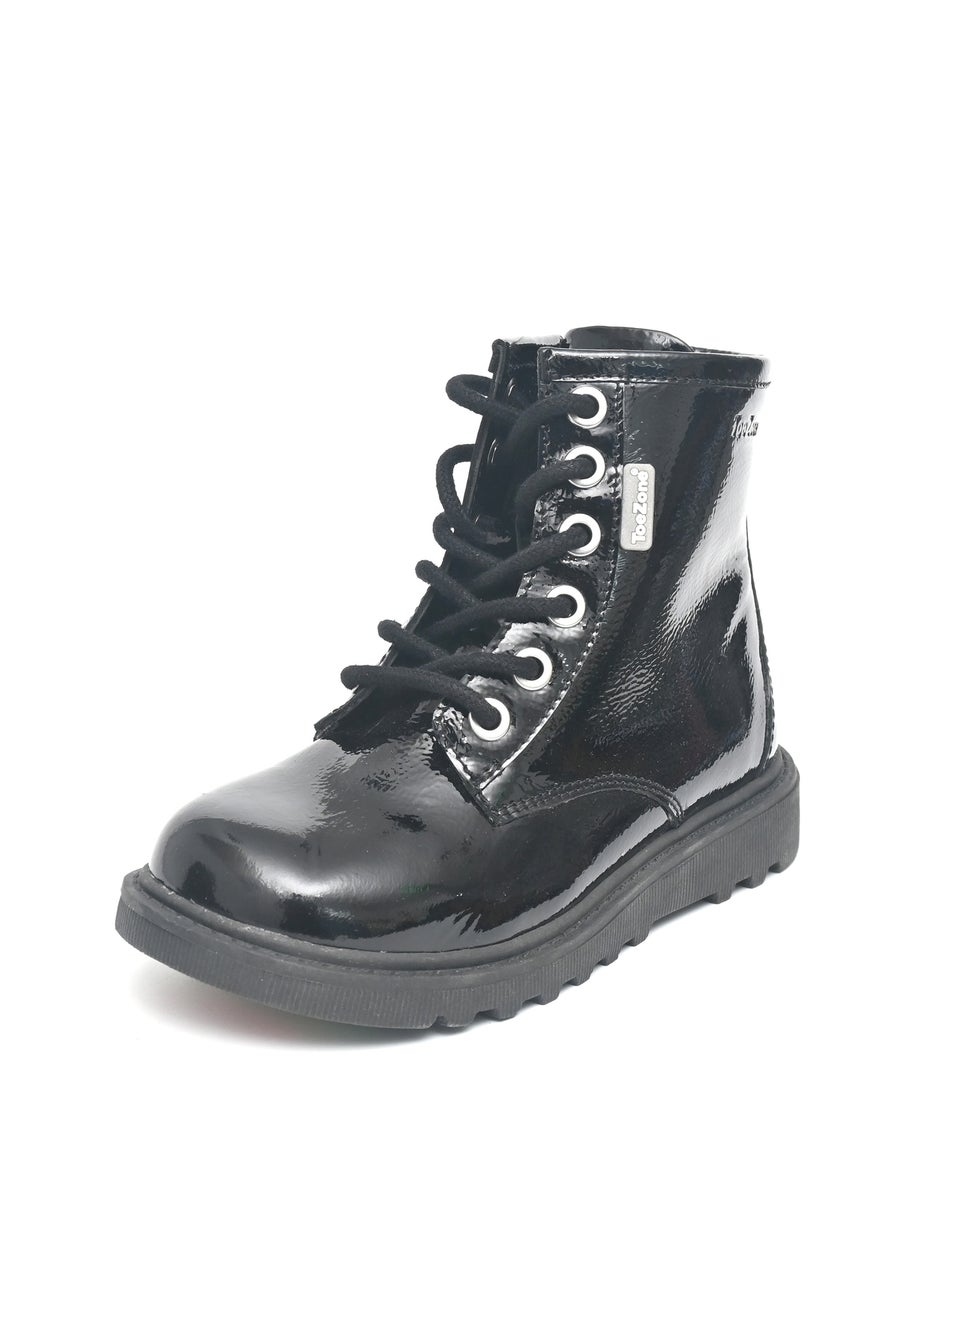 ToeZone Girls Black Alice Patent Leather Lace and Zip Boot (Younger 8-Older 2)